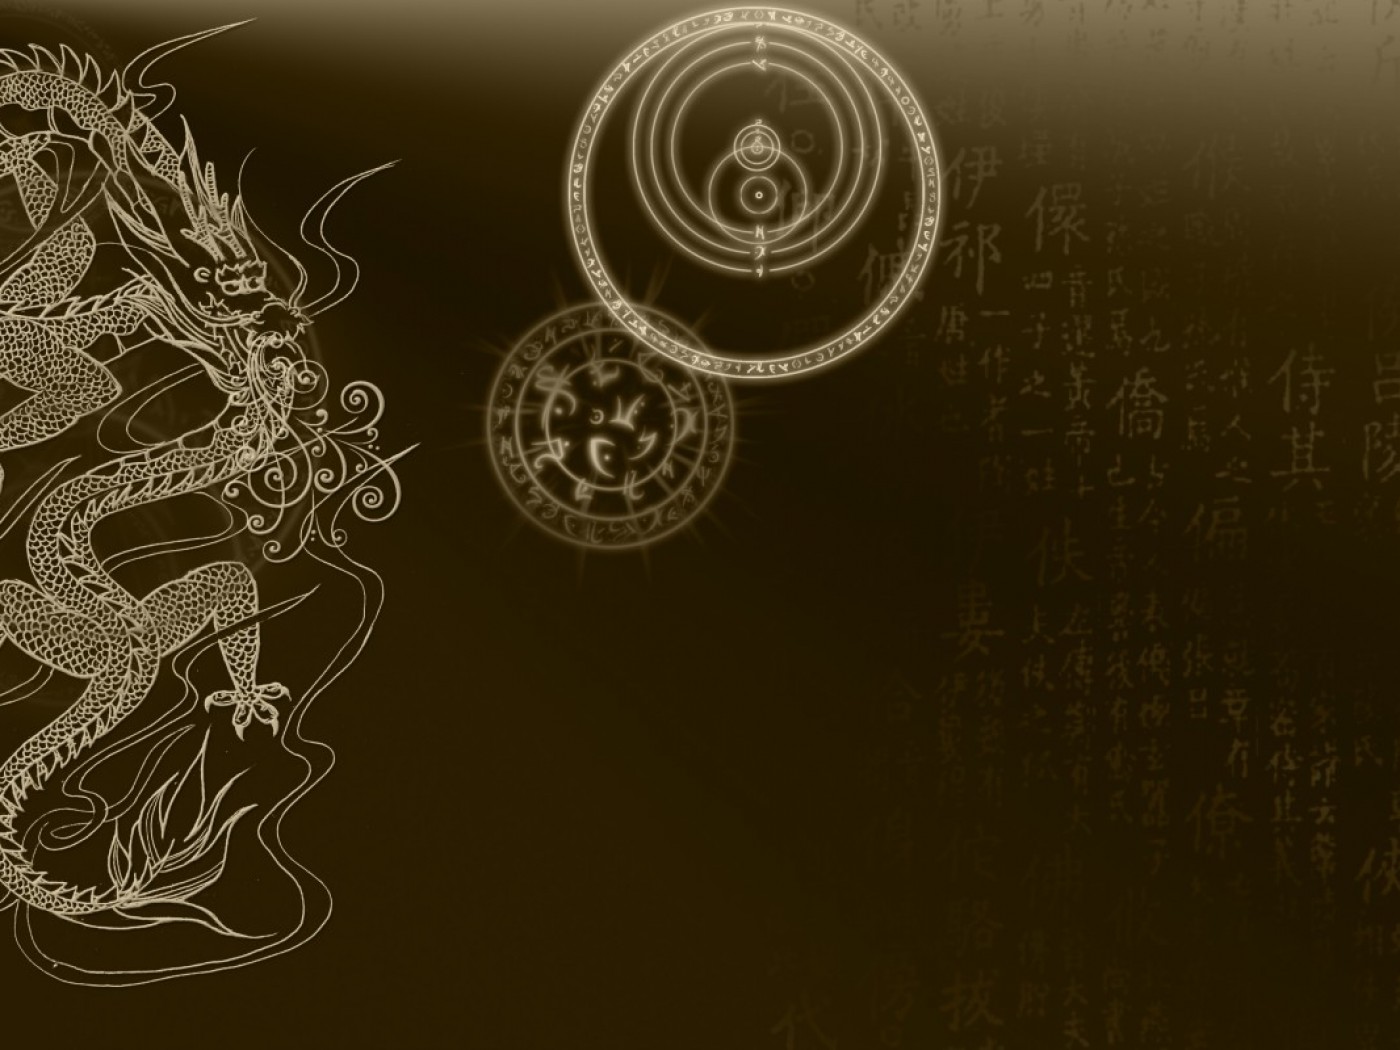 Chinese Dragons wallpapers Chinese Dragons background   Page 2